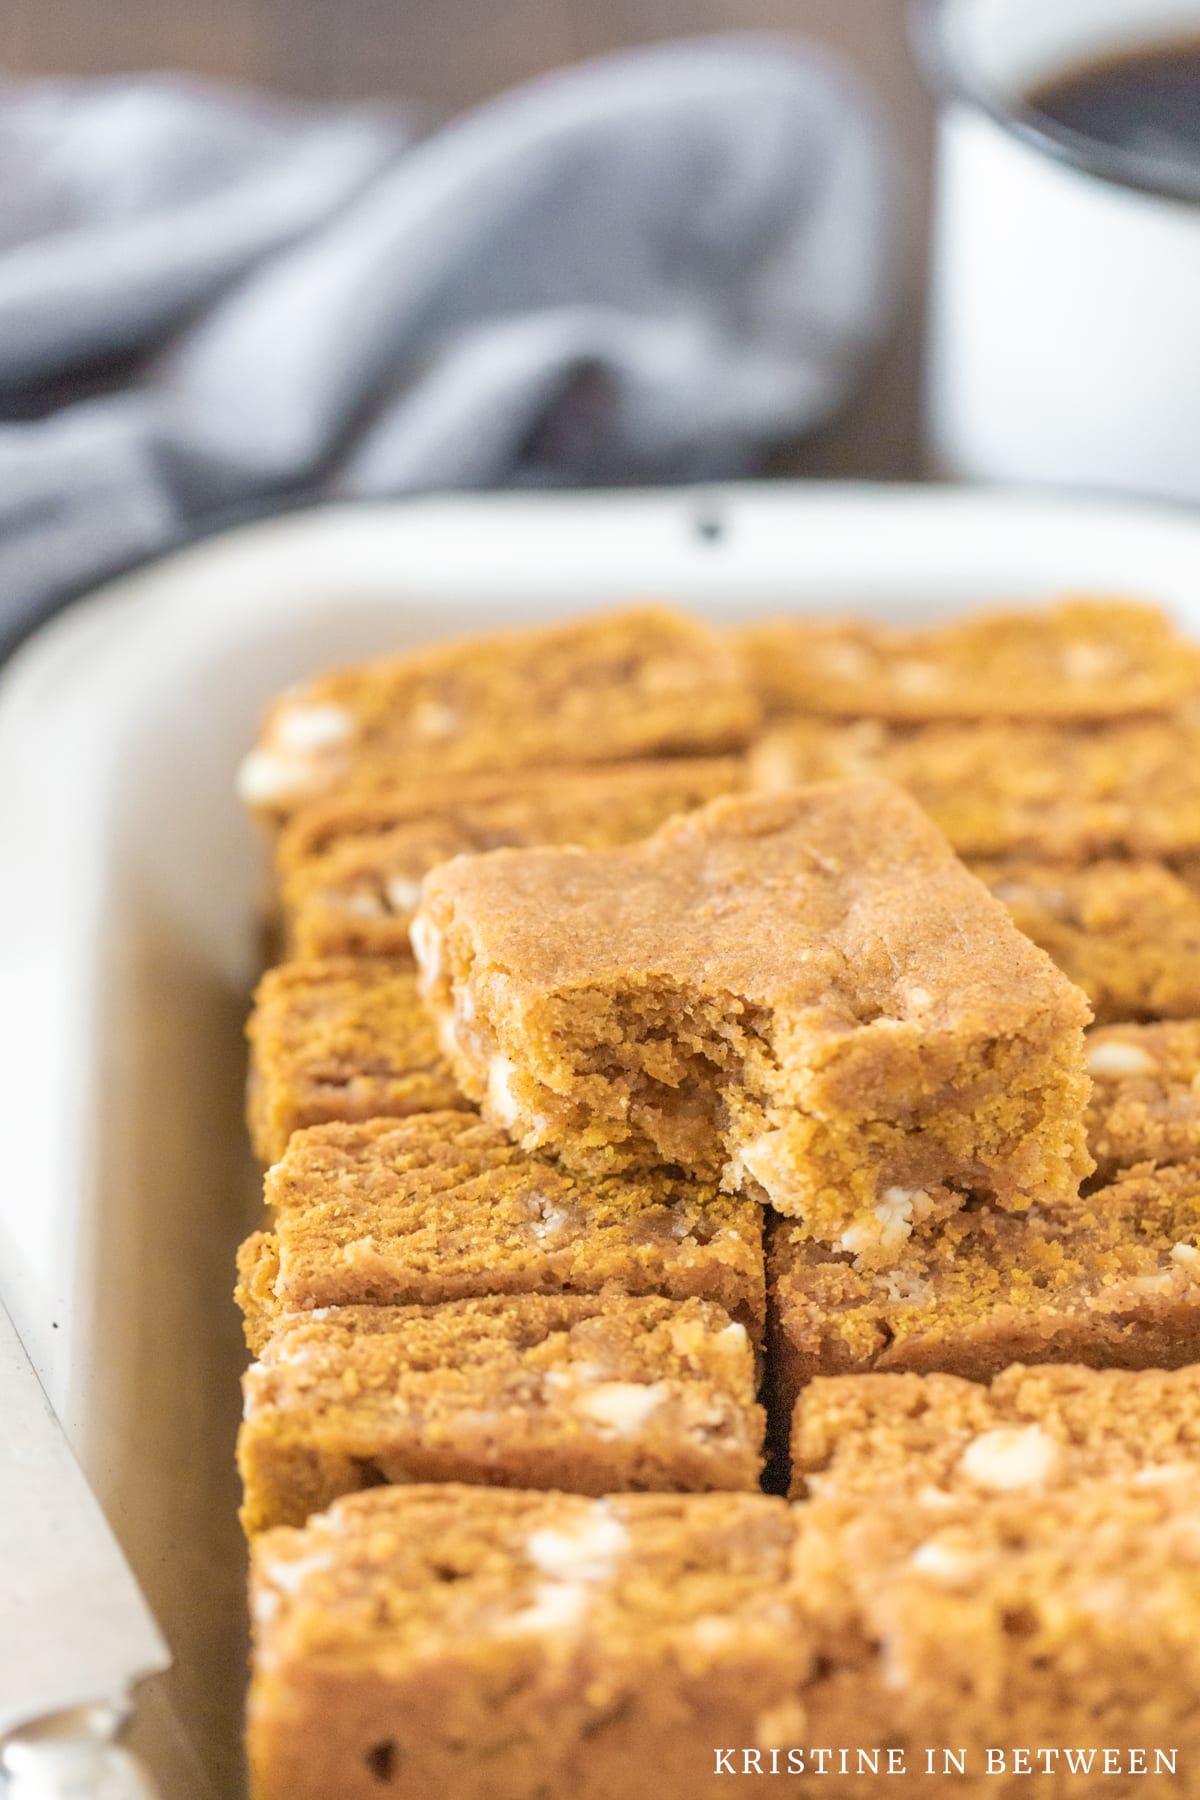 A blondie with a bite out of it laying on a pile of other blondies with a knife next to them.